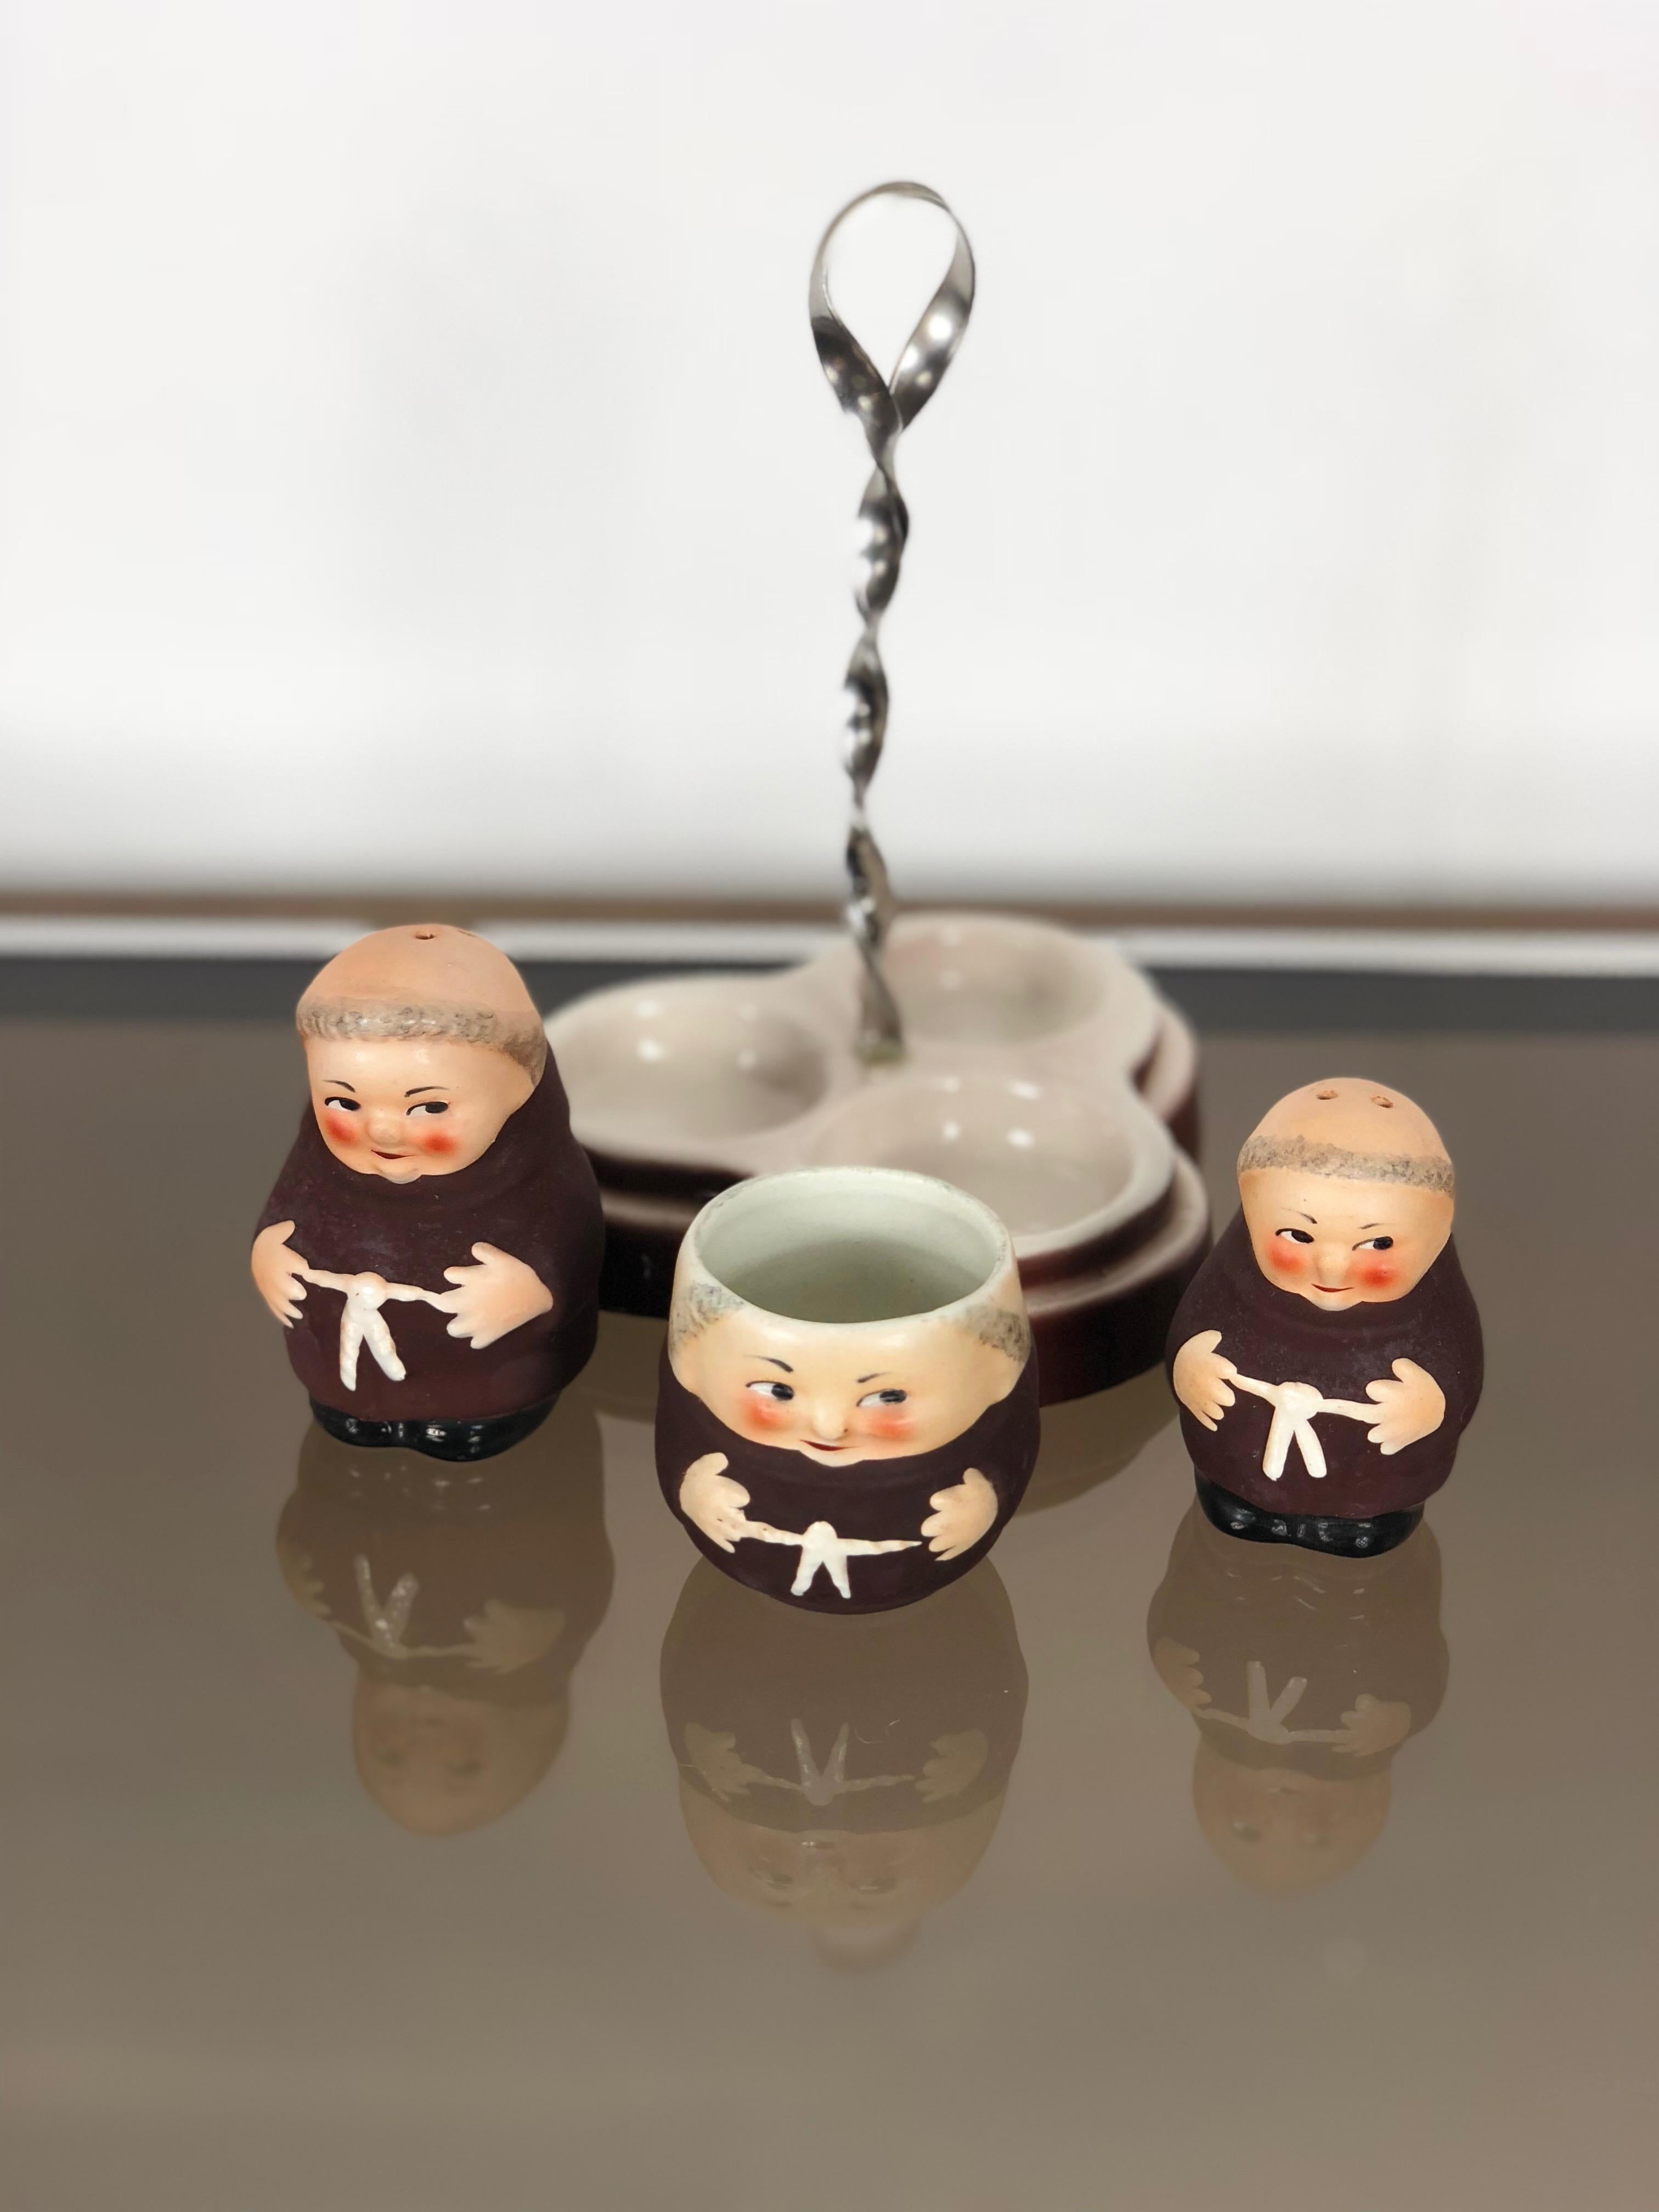 The set consists of three different sized Franciscan monks in porcelain. 

It has its original 